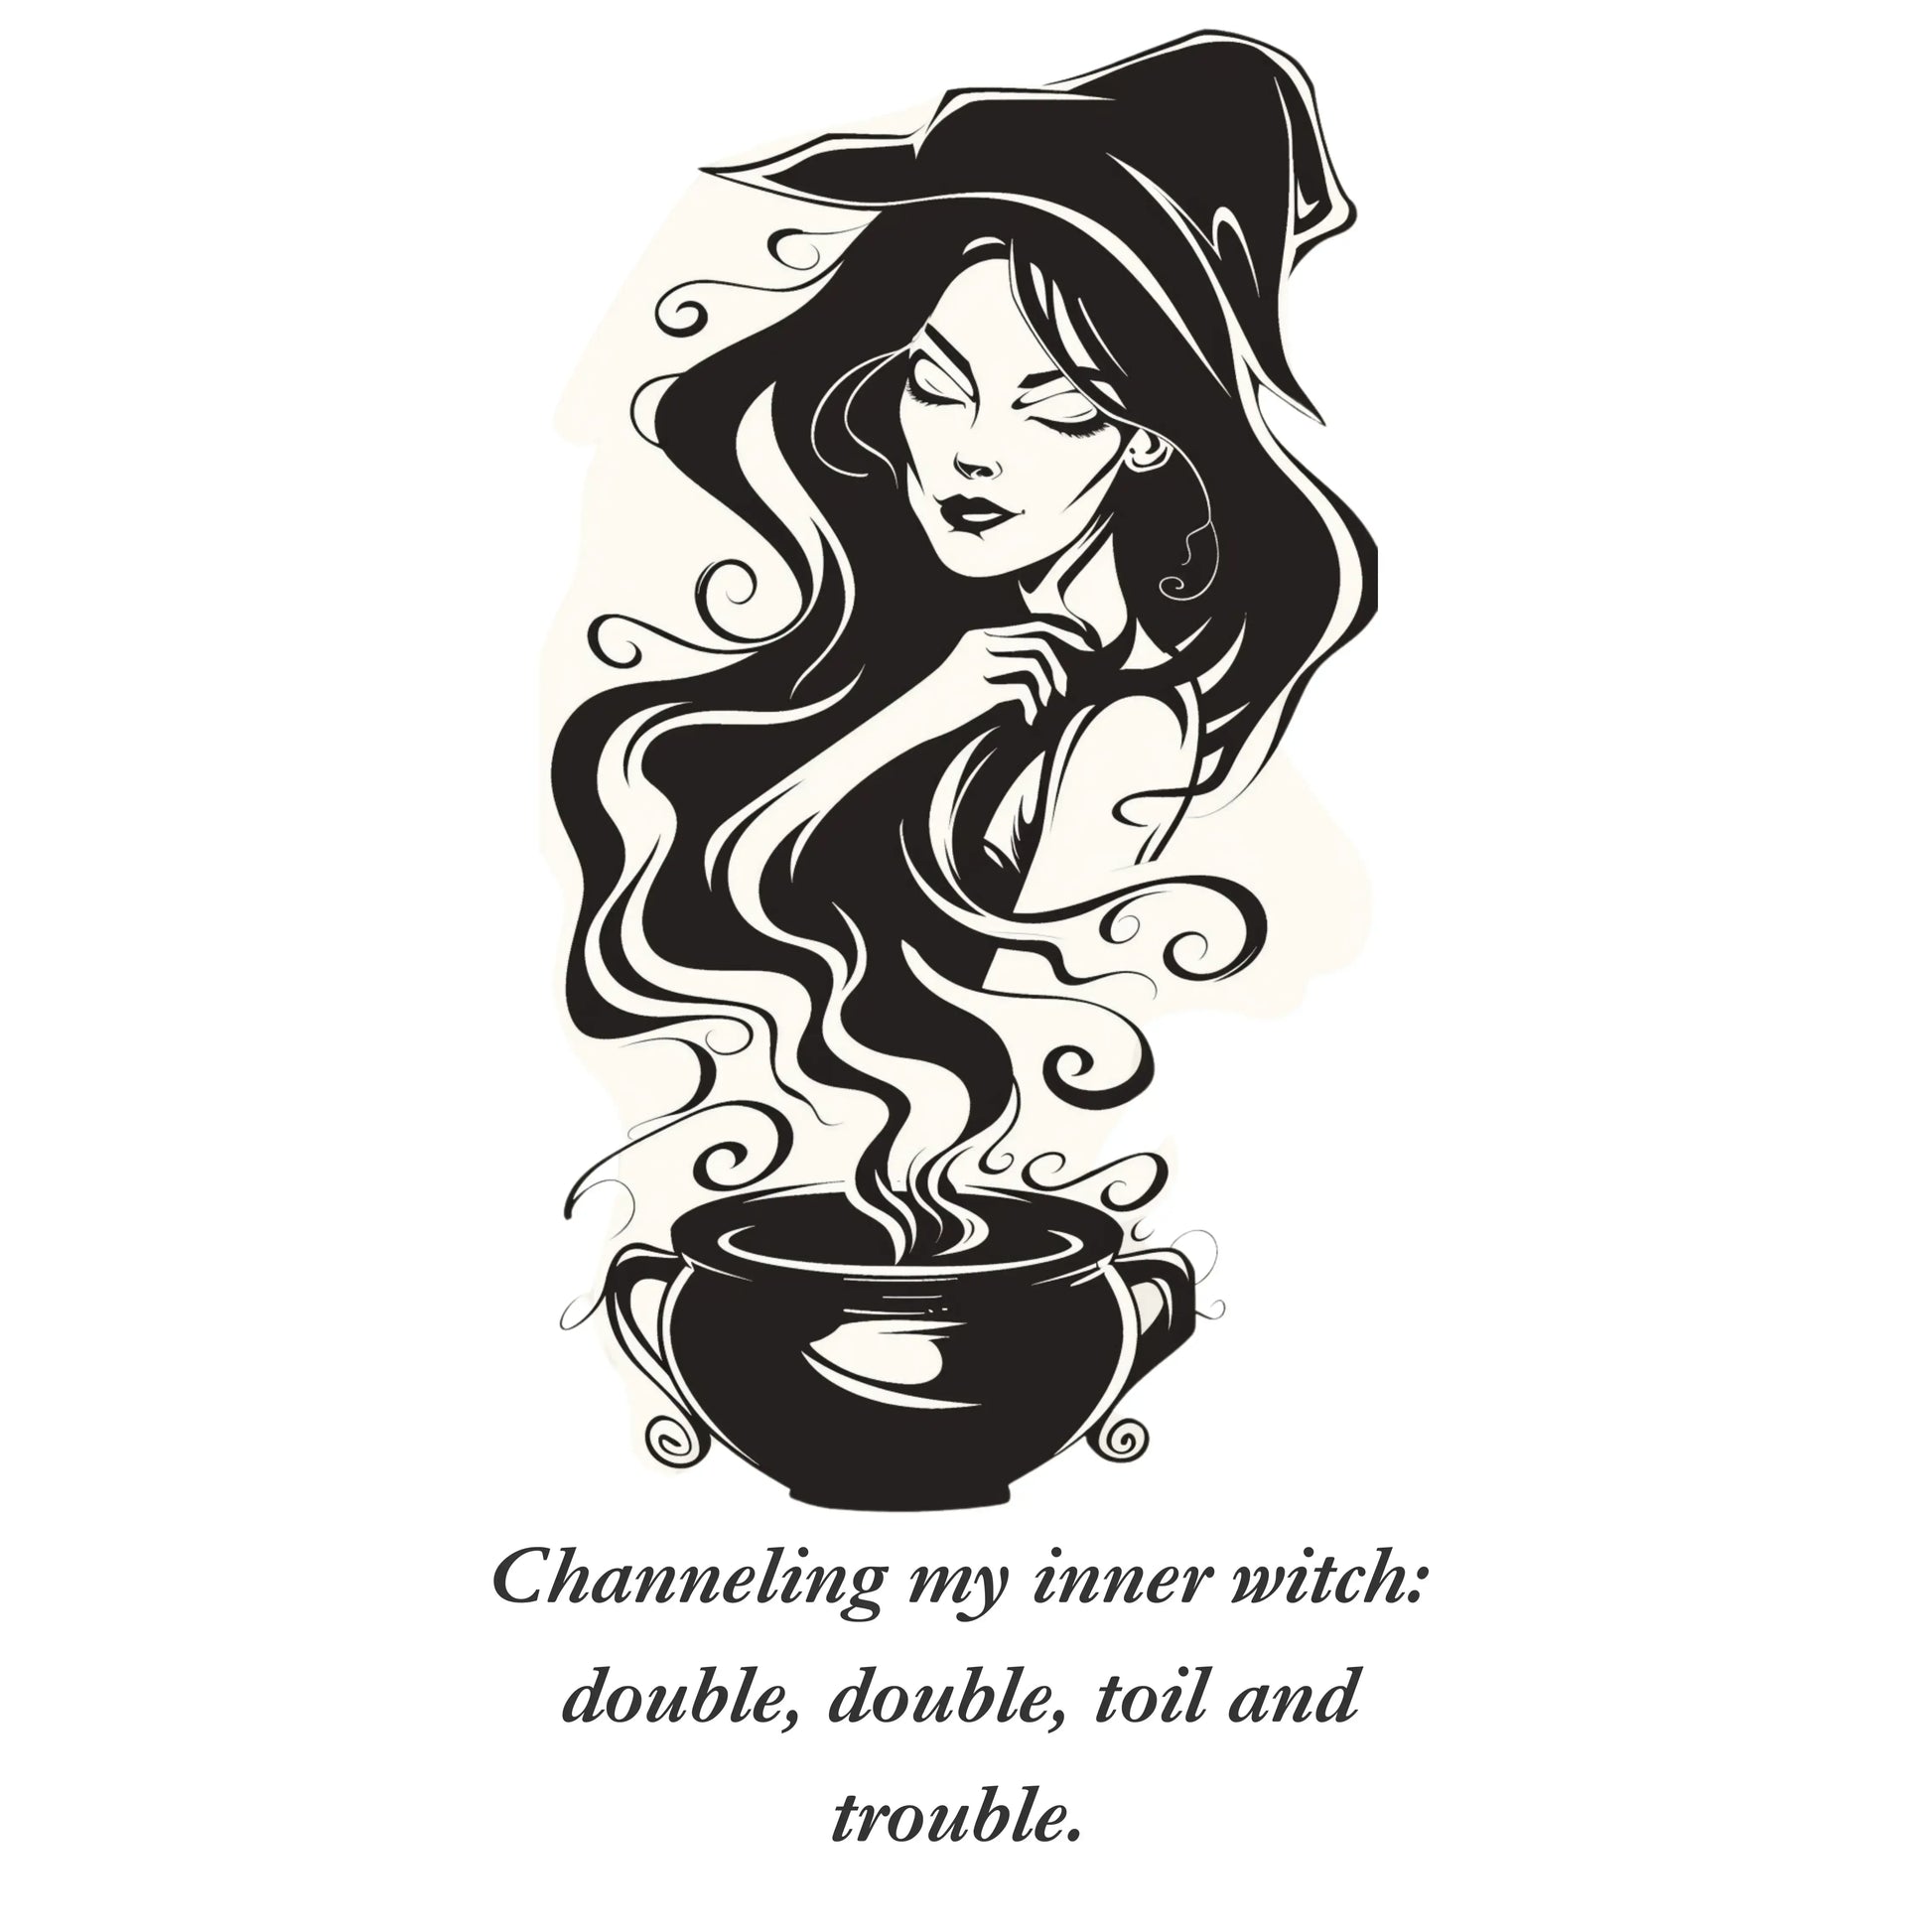 Channeling my inner witch double double toil and trouble graphic design from BLK Moon shop.